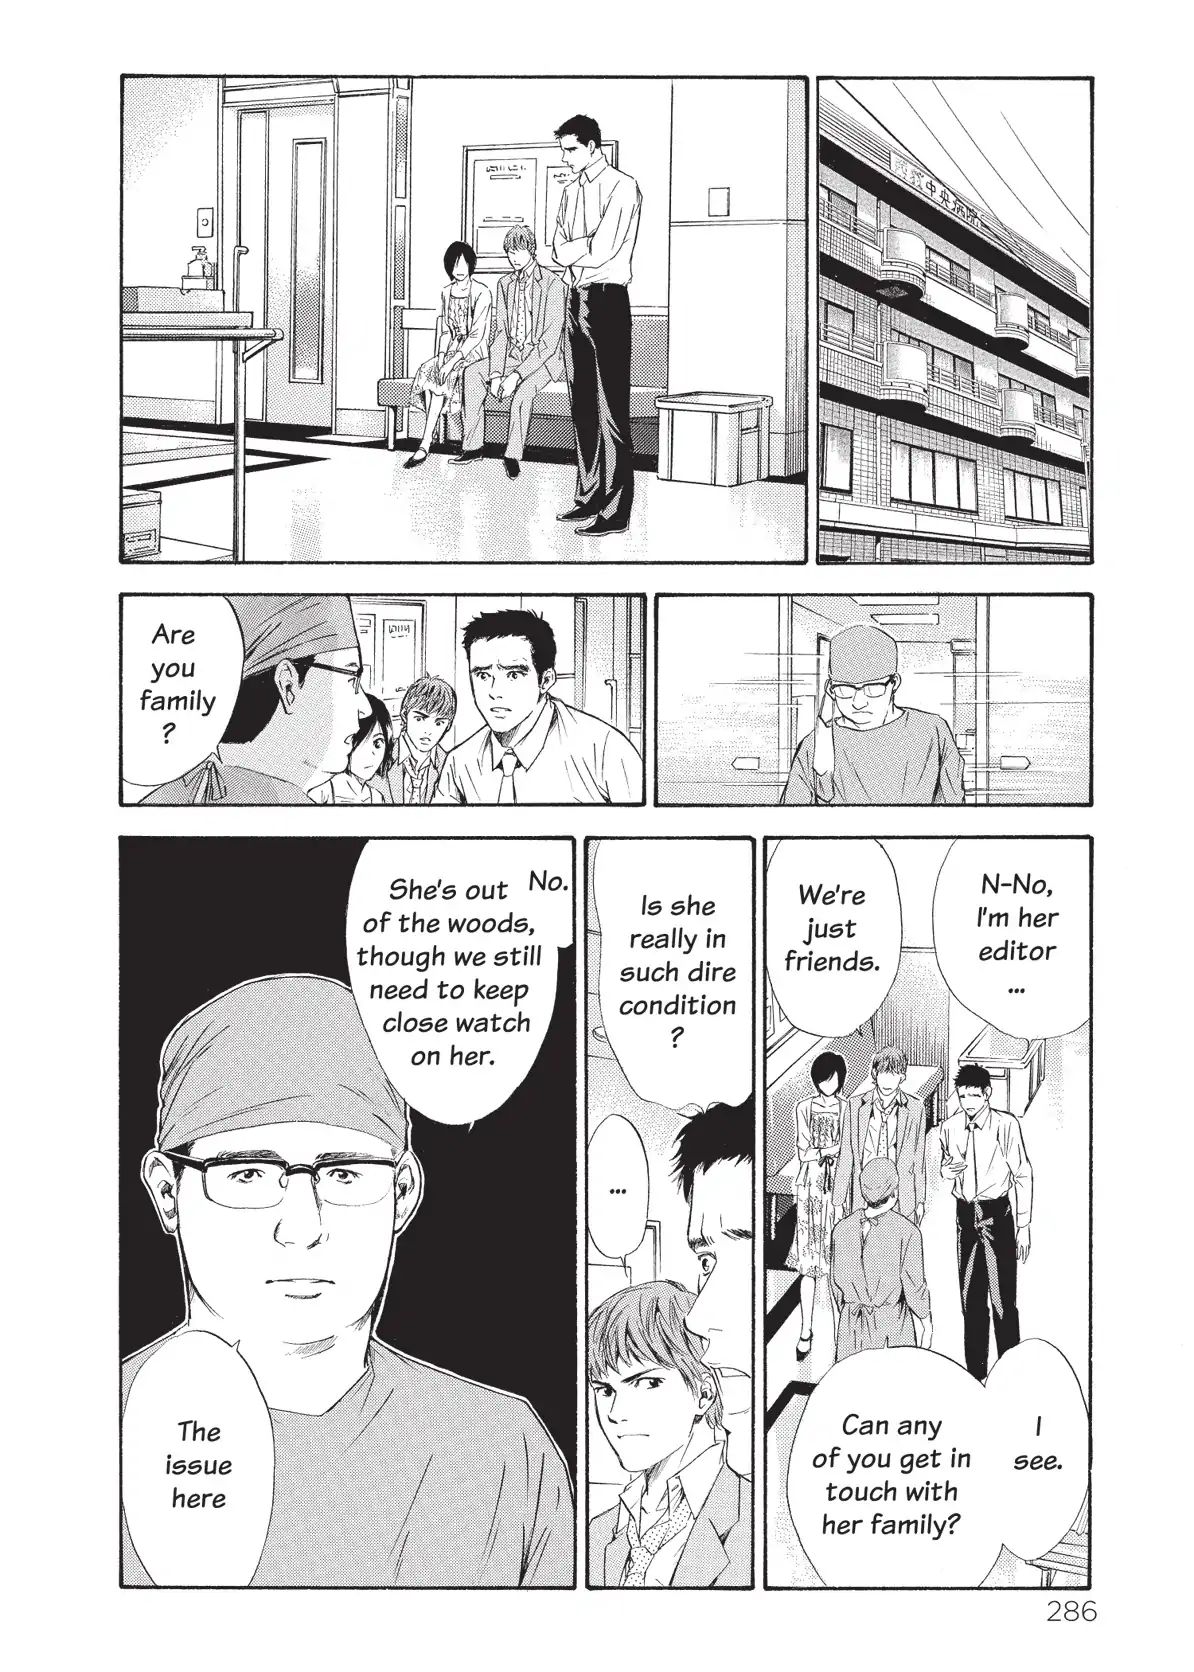 Kami No Shizuku Vol.4 Chapter 73: The Wages Of An Affair - Picture 2